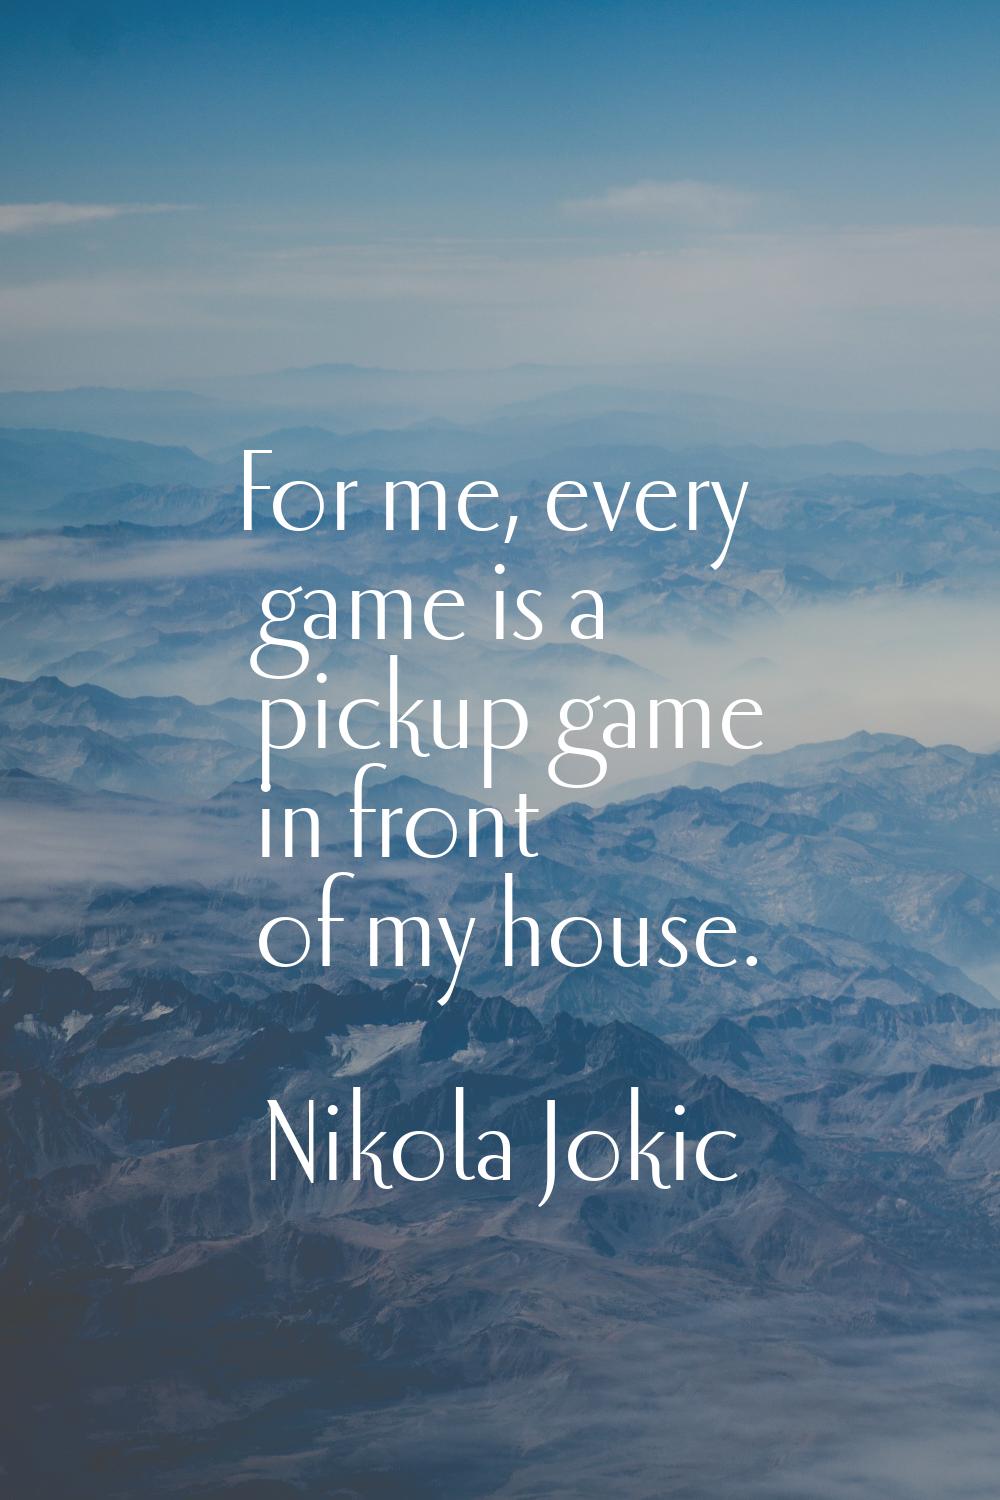 For me, every game is a pickup game in front of my house.